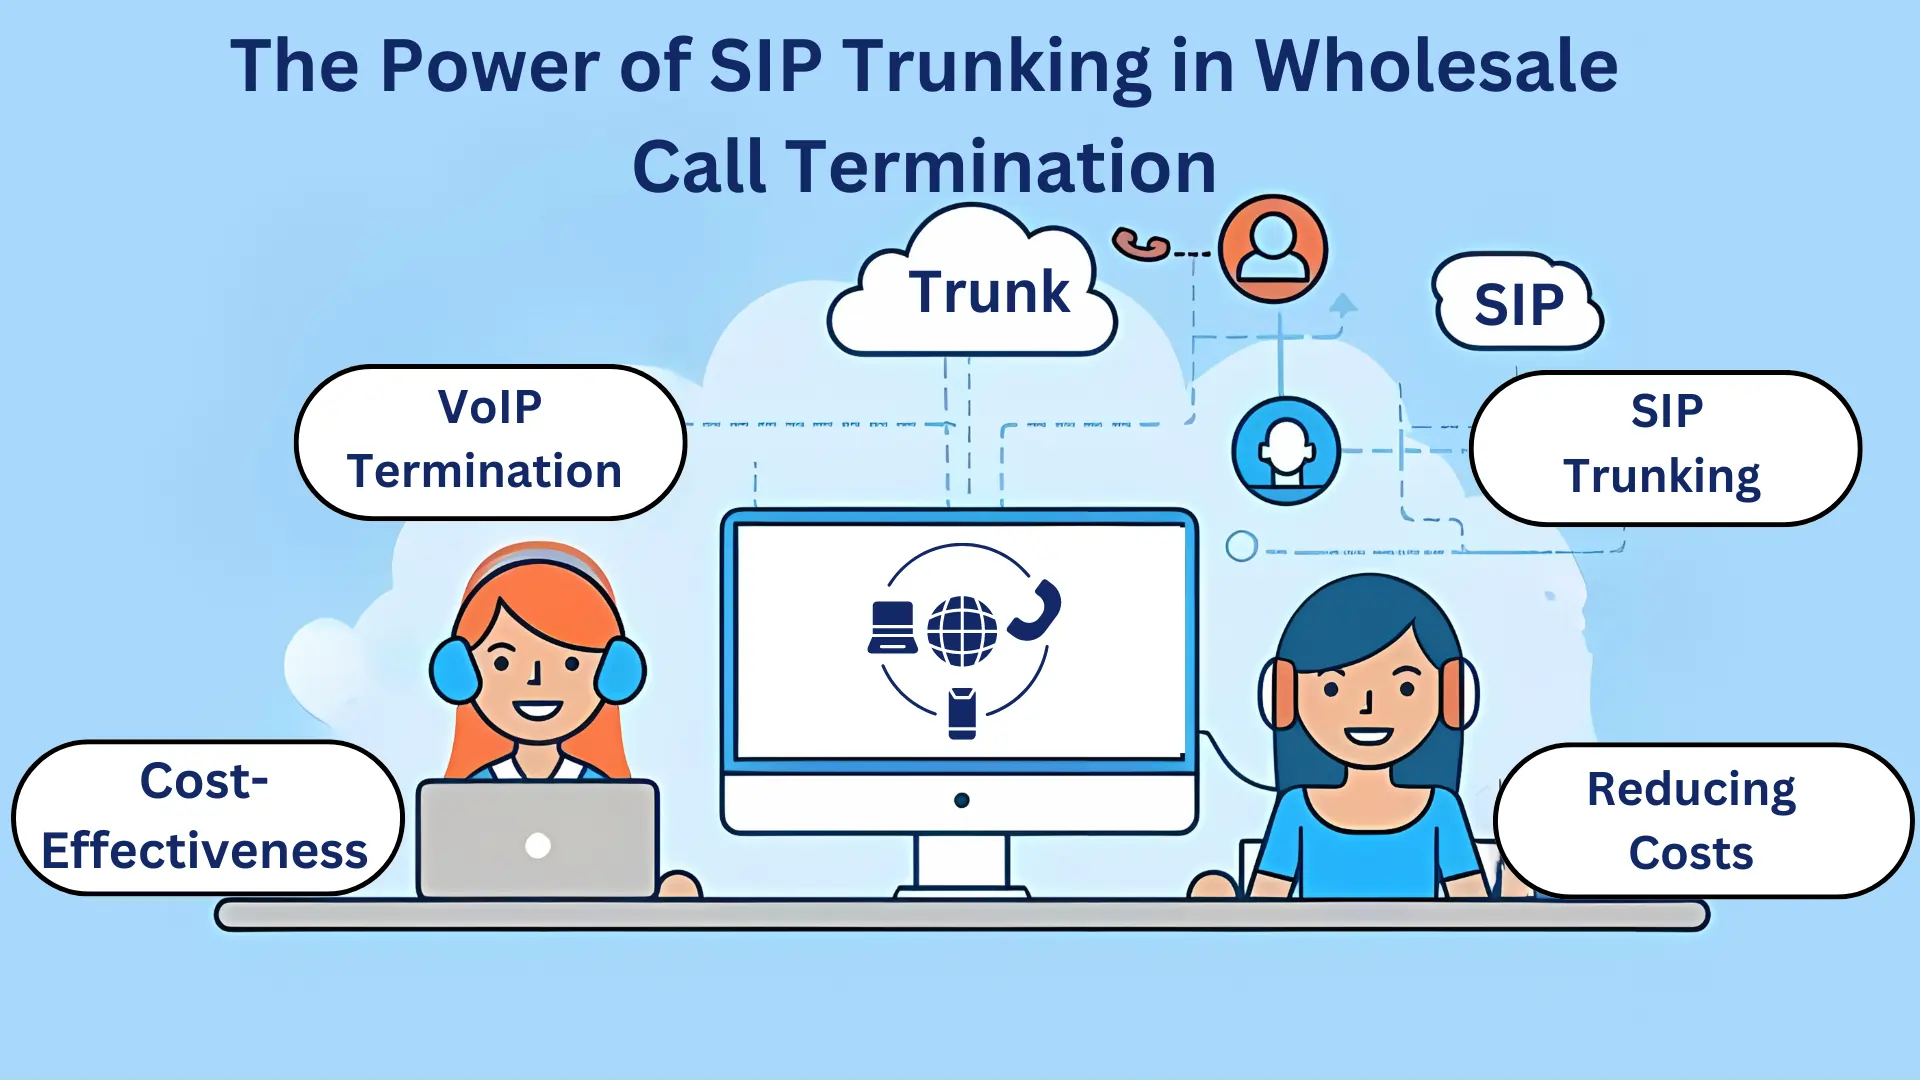 The Power of SIP Trunking in Wholesale Call Termination